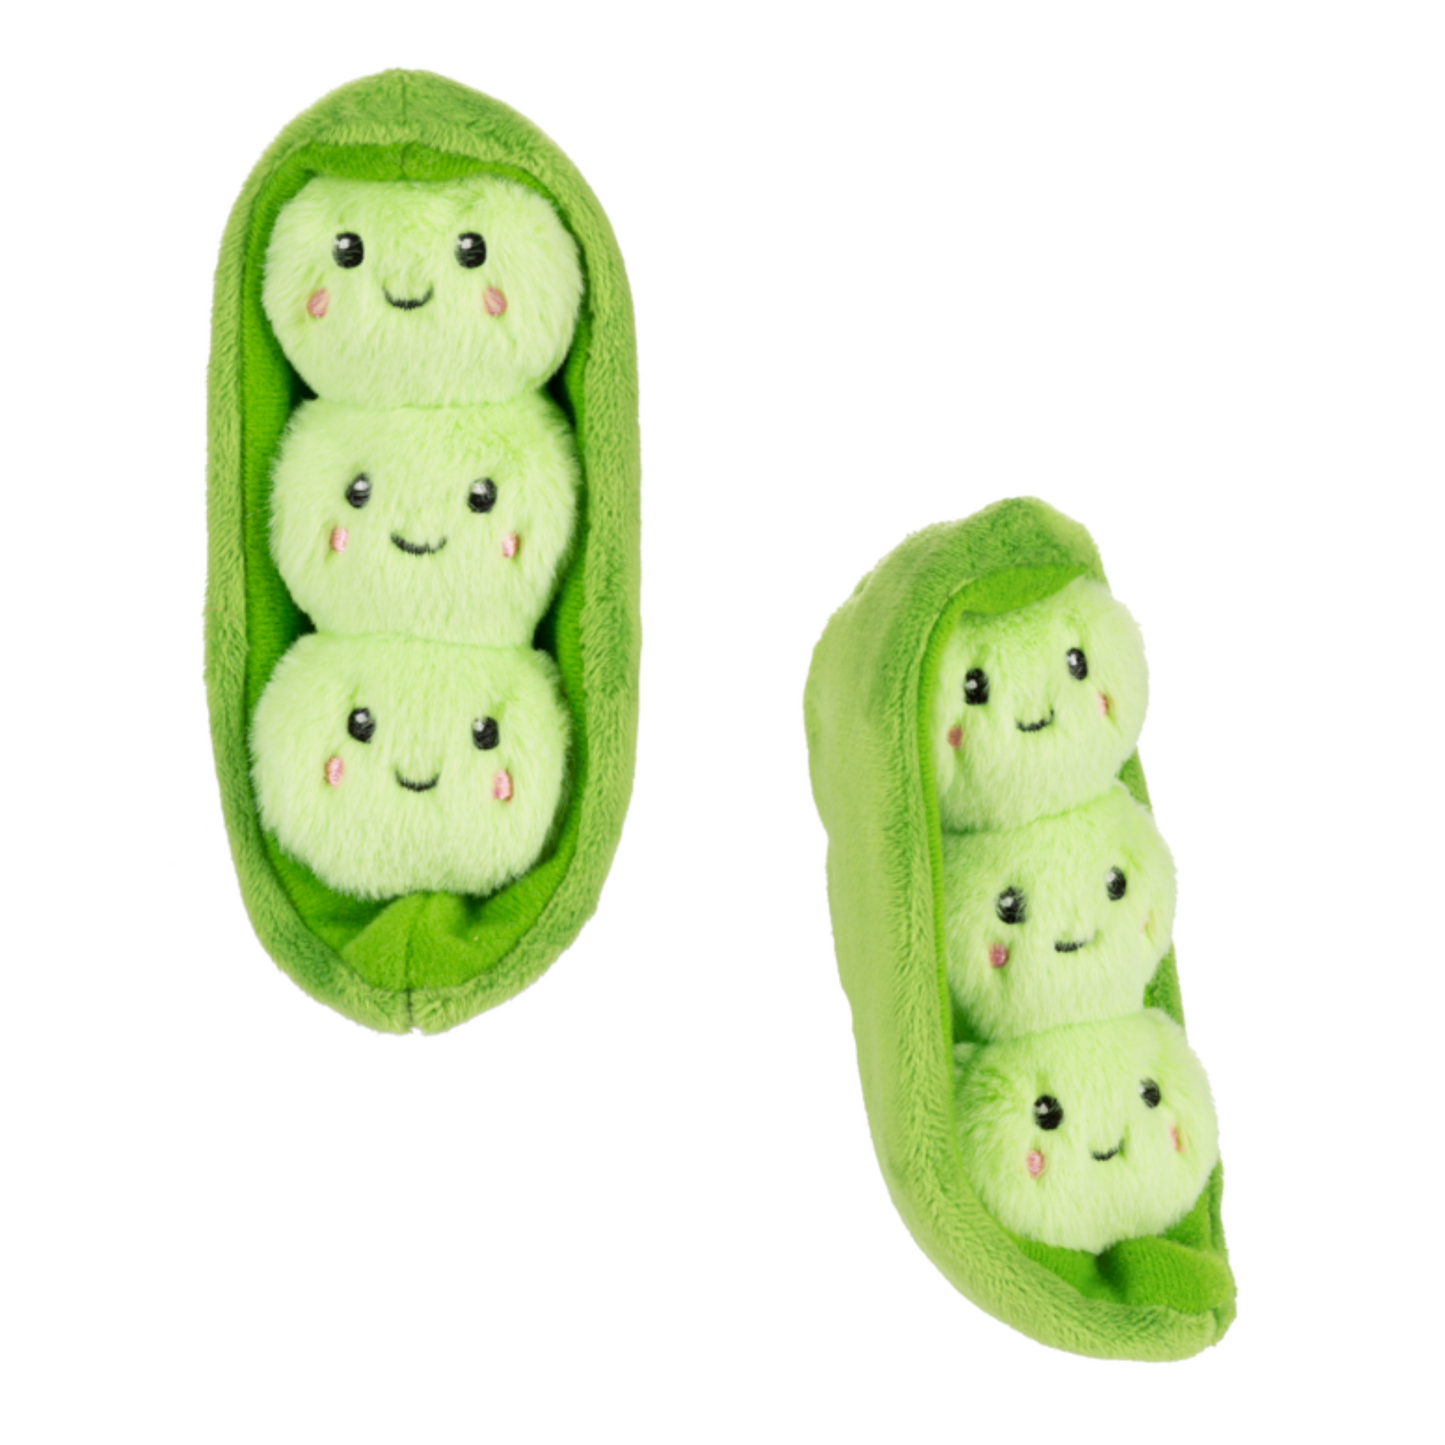 Peas and Avocado Better Bites (set of 2) – Growing Sound Play and Learn